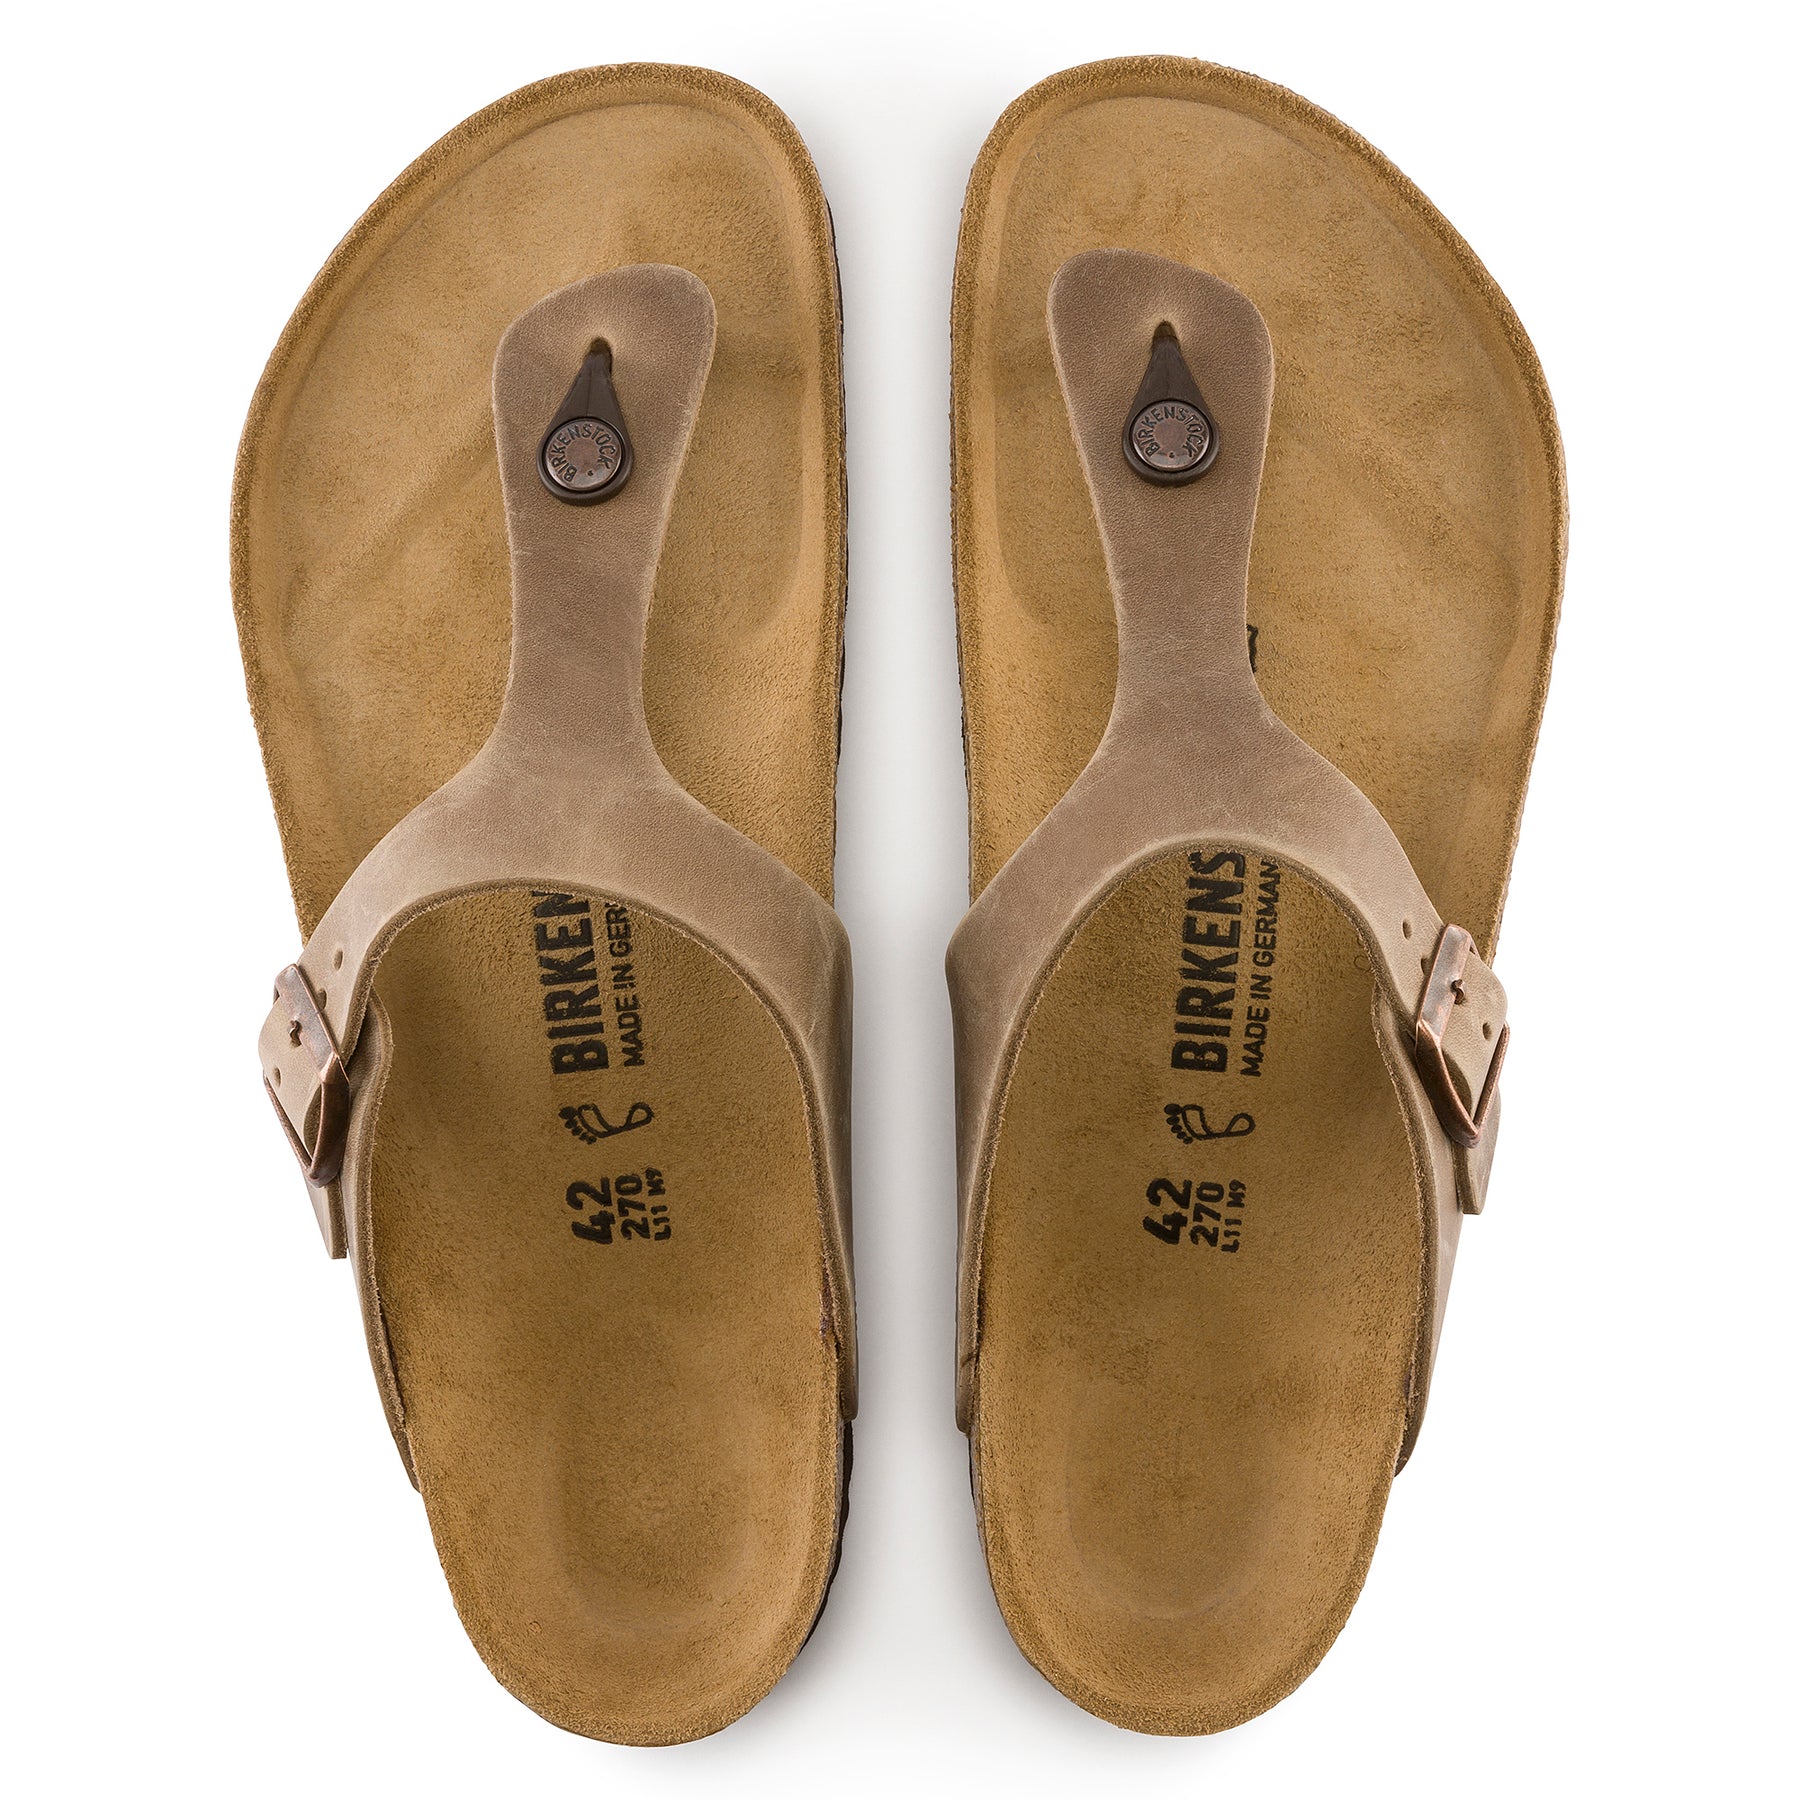 Birkenstock Gizeh tobacco oiled leather